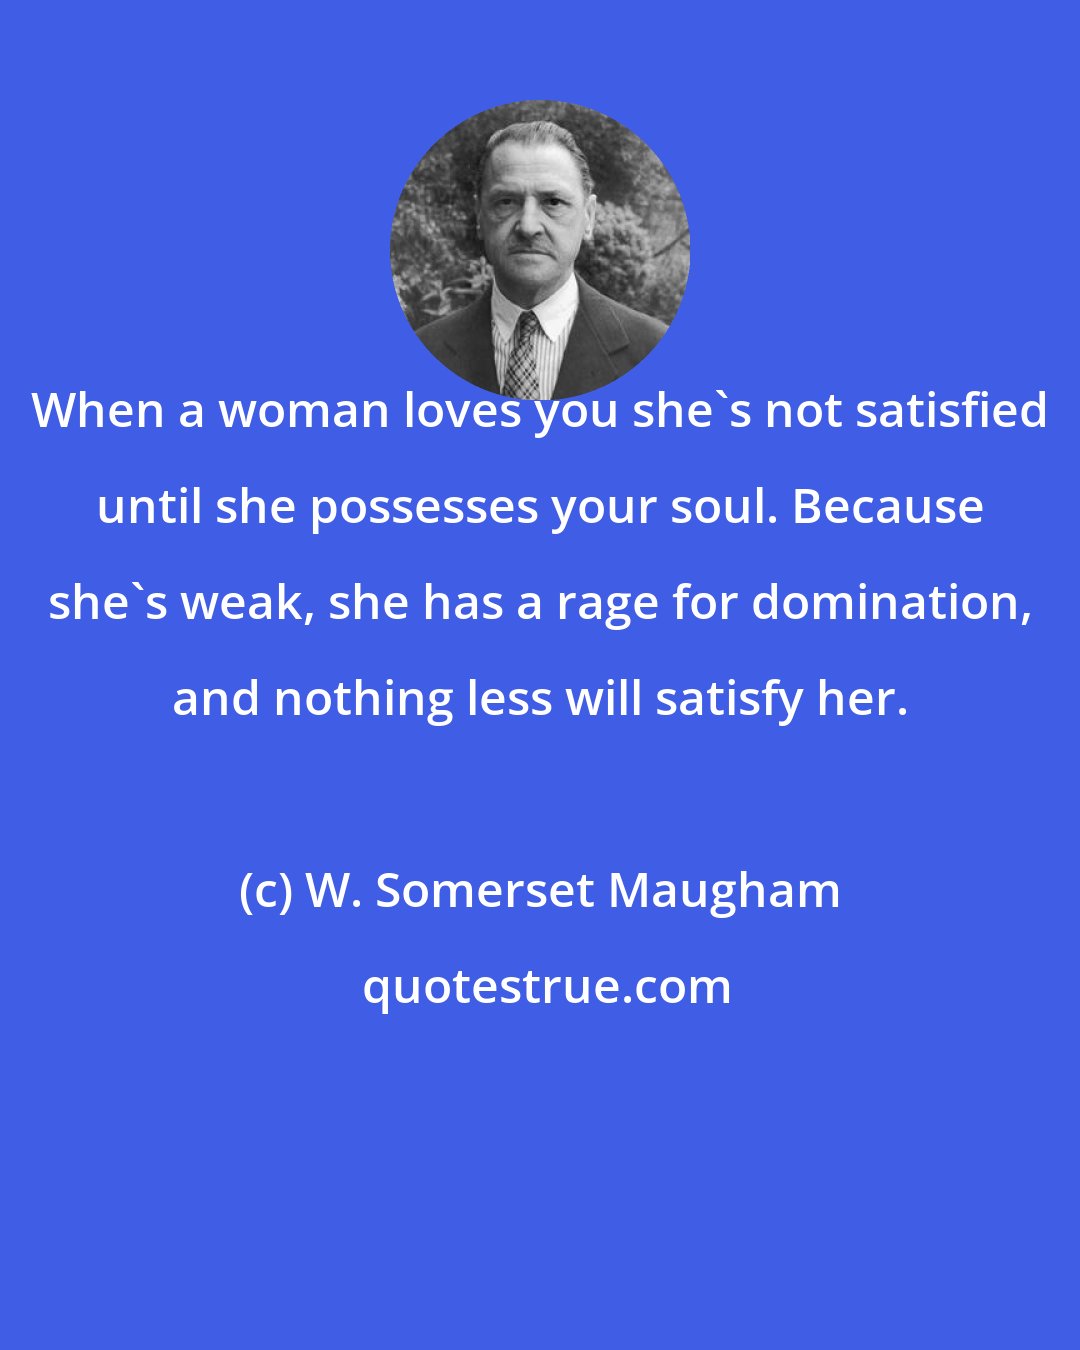 W. Somerset Maugham: When a woman loves you she's not satisfied until she possesses your soul. Because she's weak, she has a rage for domination, and nothing less will satisfy her.